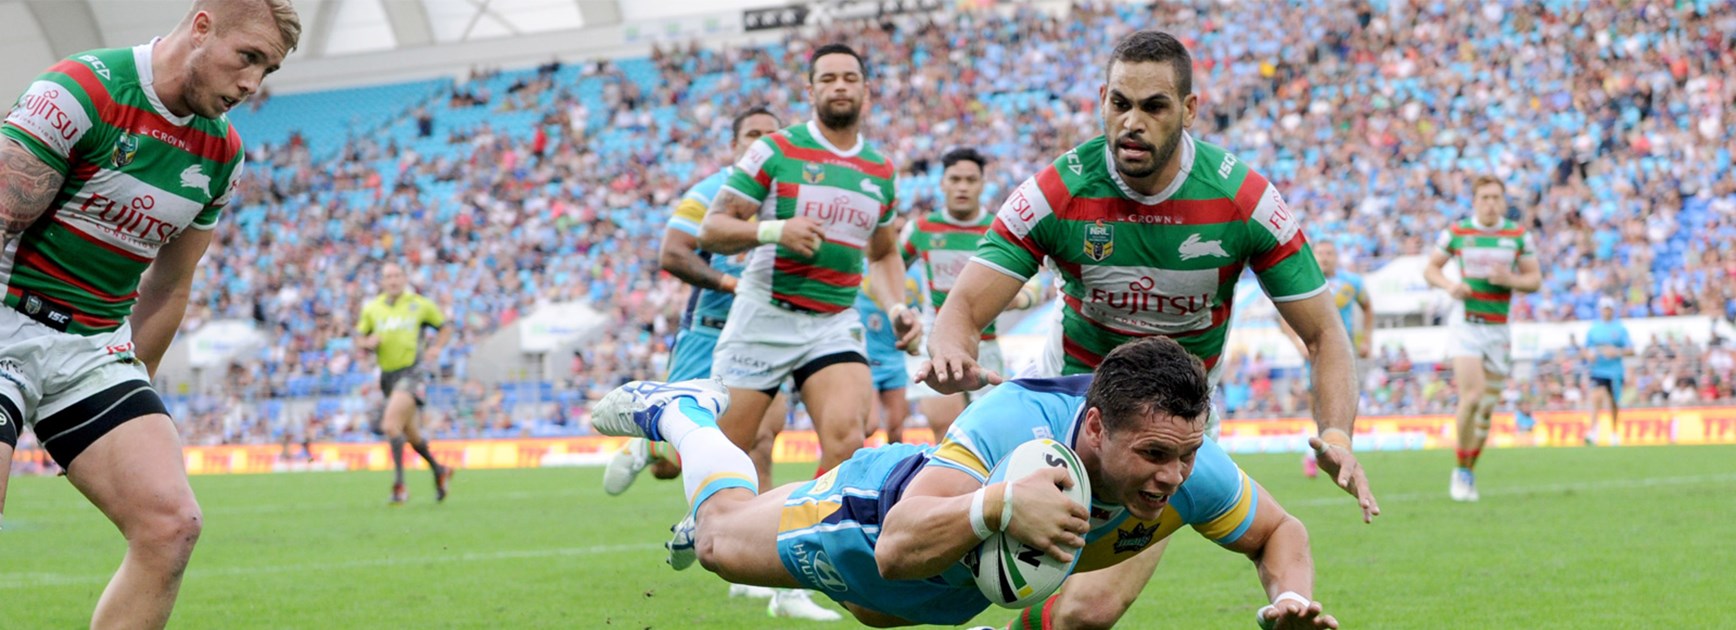 James Roberts continued his blistering start to the season with another try and try assist against Souths.